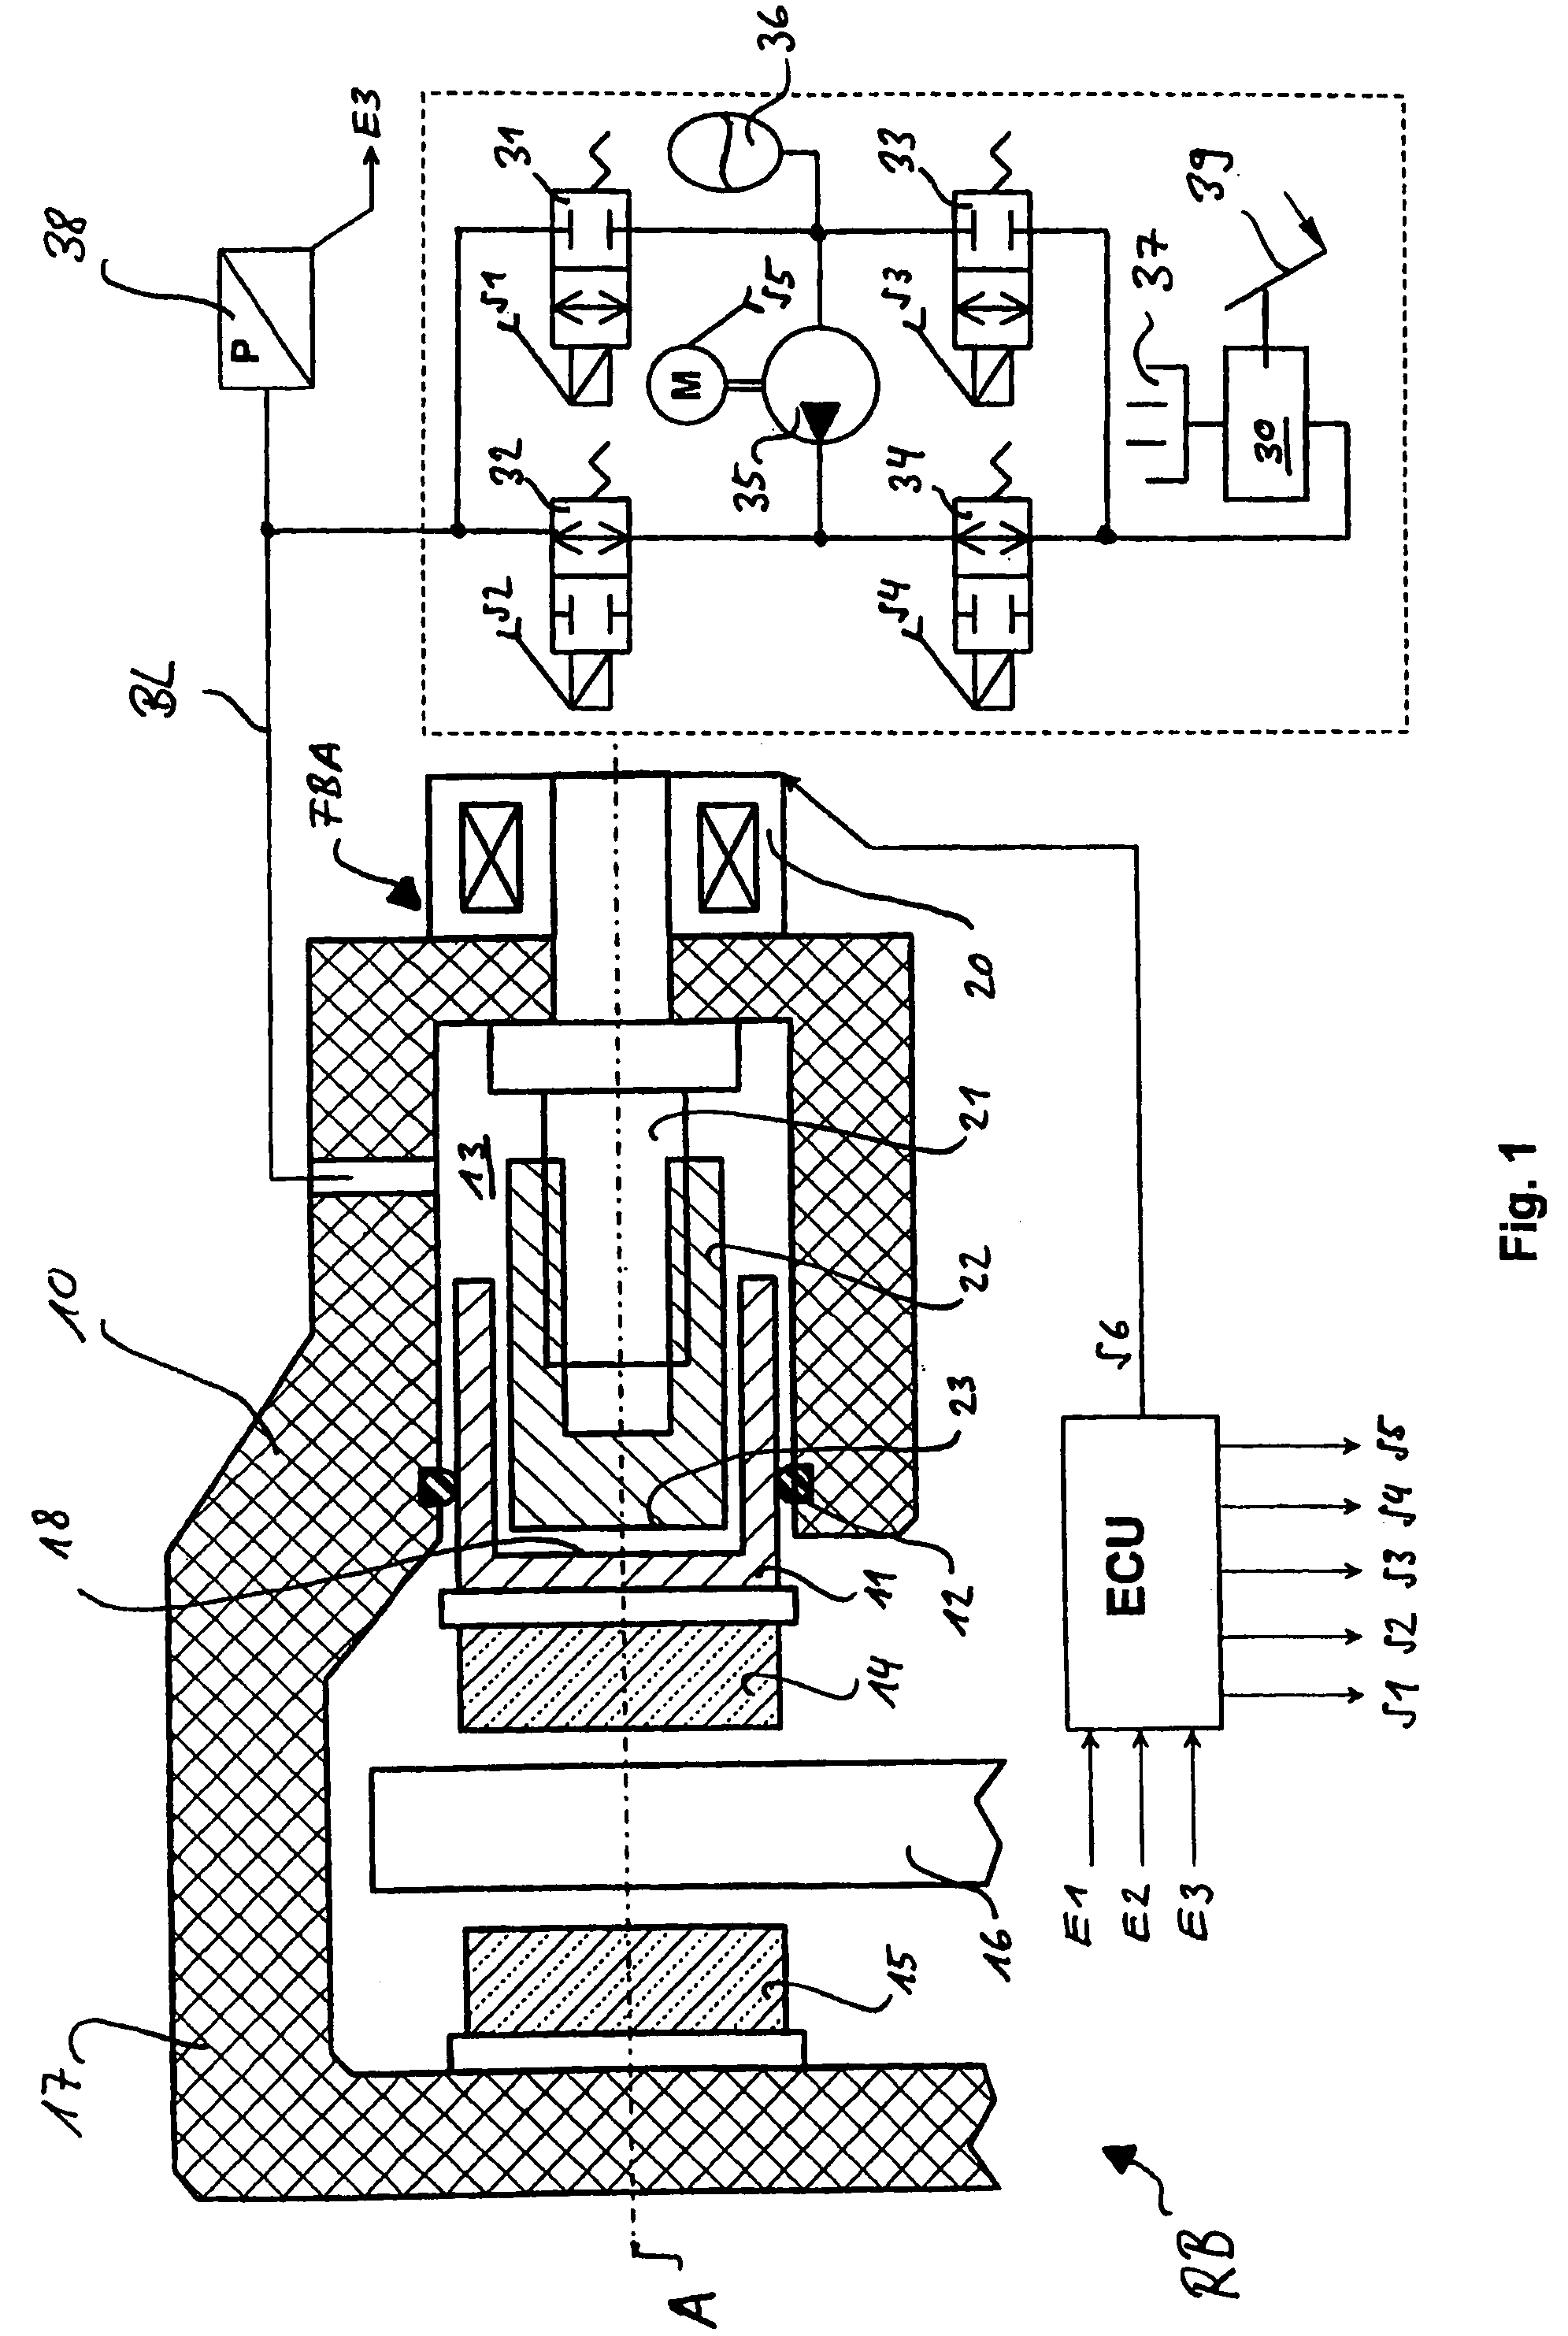 Method for operating to brake gear of a vehicle